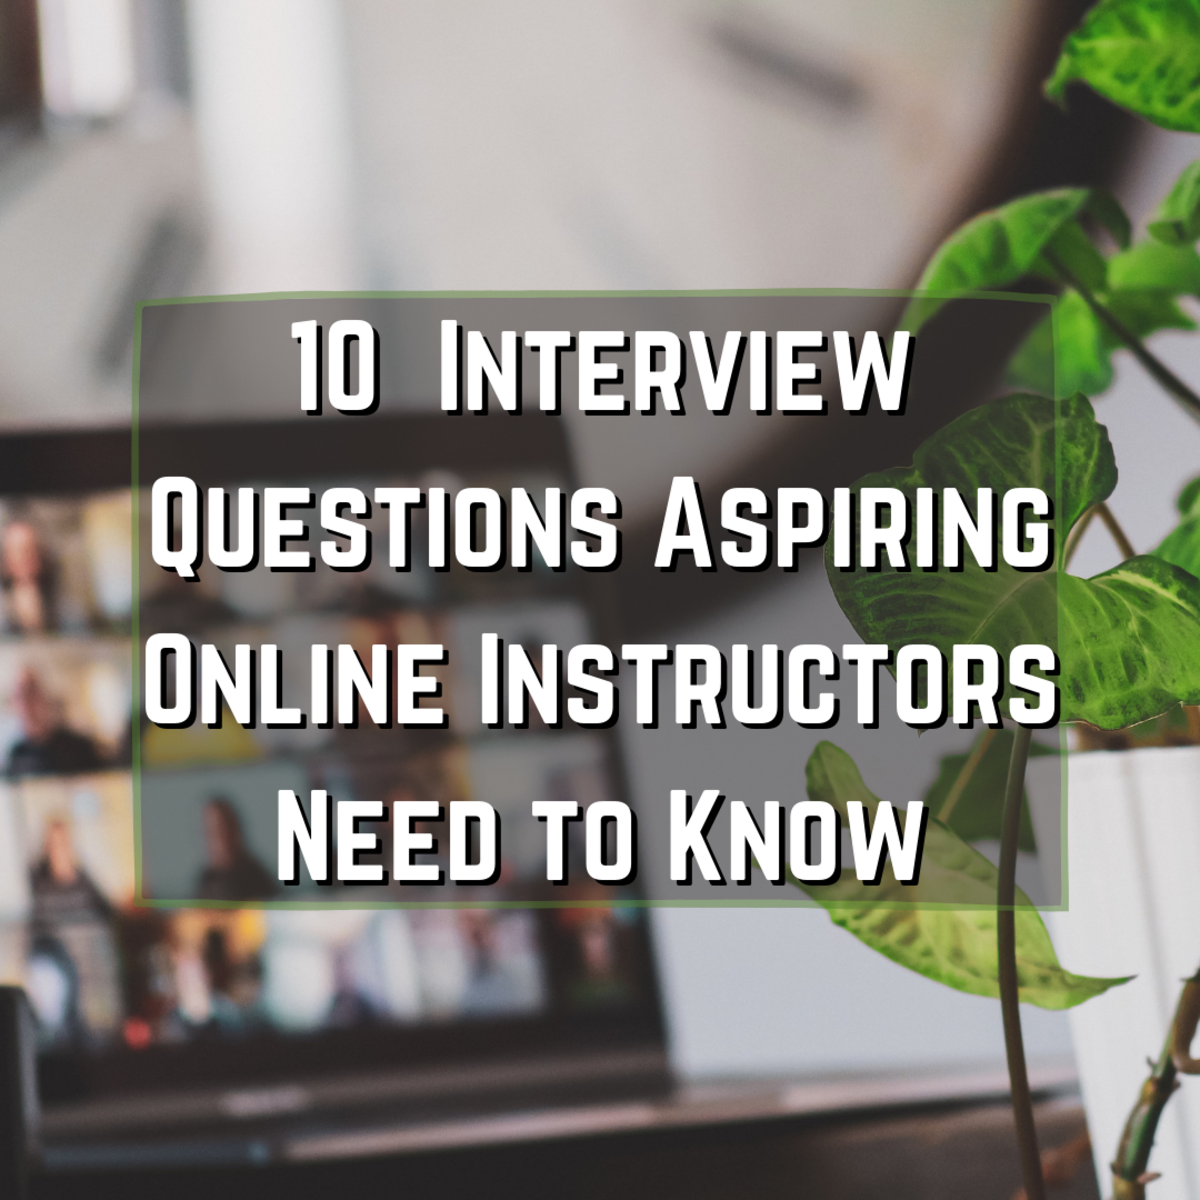 Read on to learn 10 important questions you should master before interviewing for online teaching positions. Nail these online teaching interview questions and you're sure to land a gig.